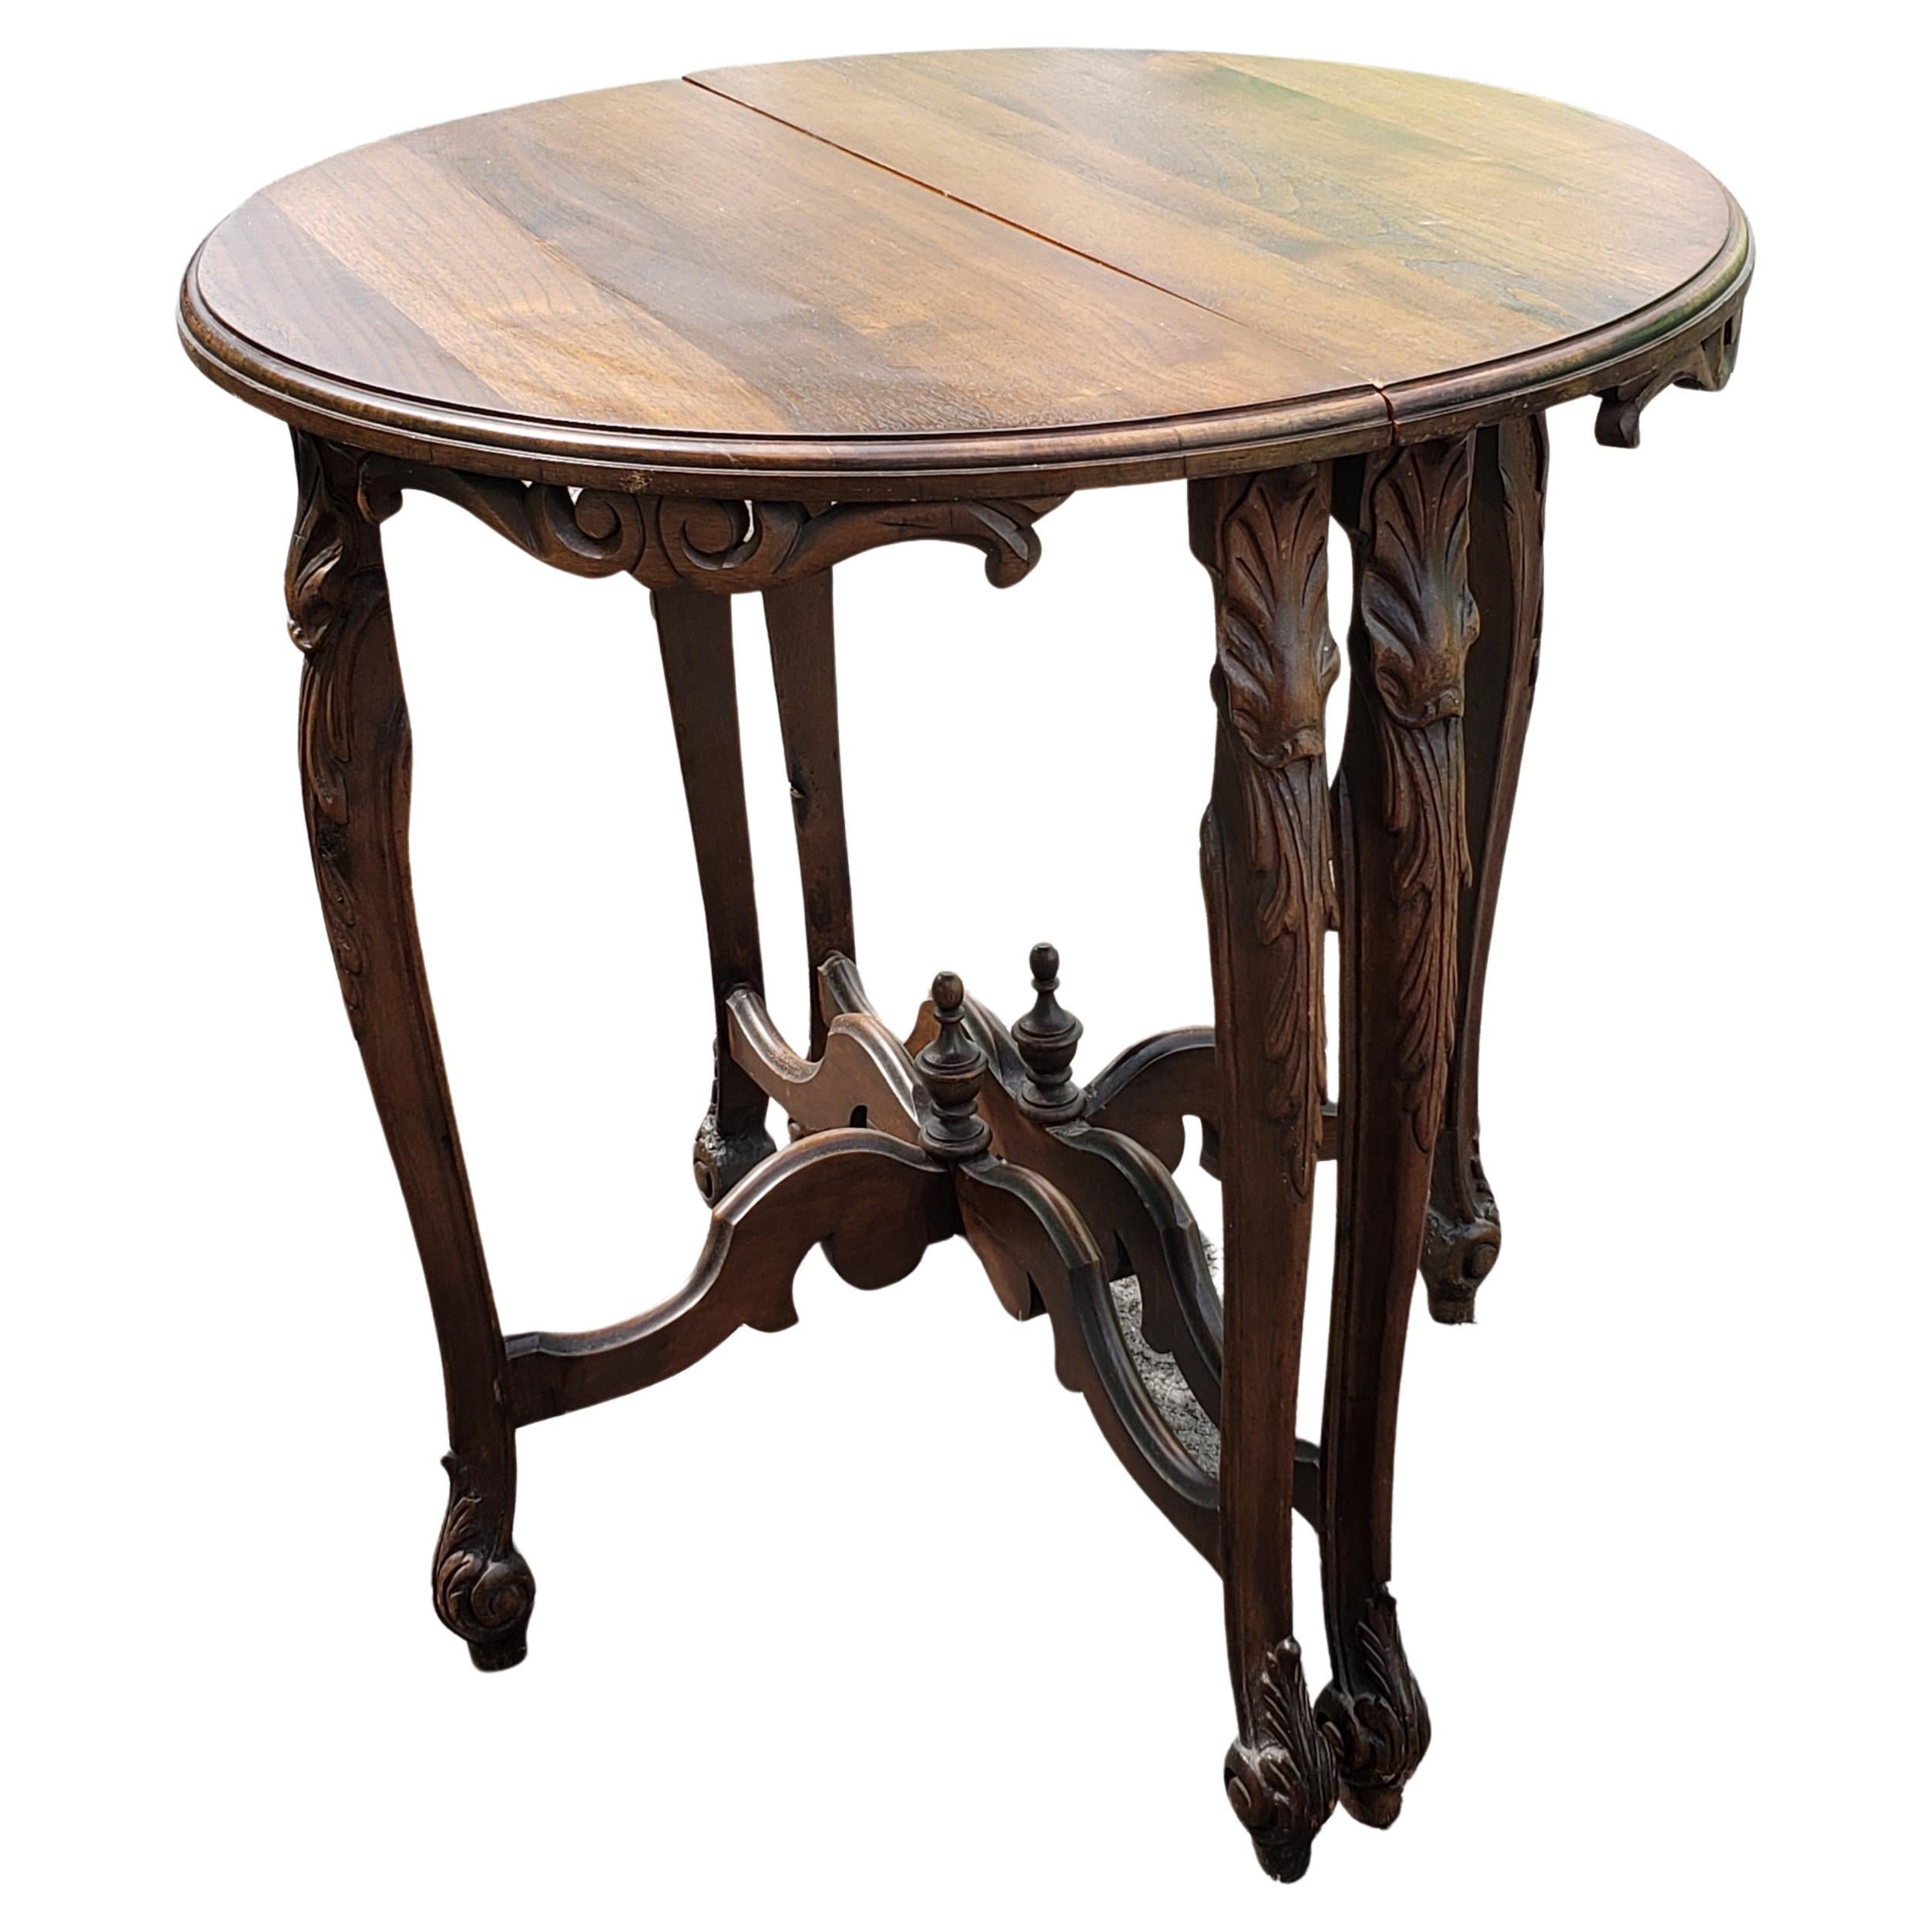 1930s Edwardian Carved Walnut Demi-Lune Side Tables In Good Condition For Sale In Germantown, MD